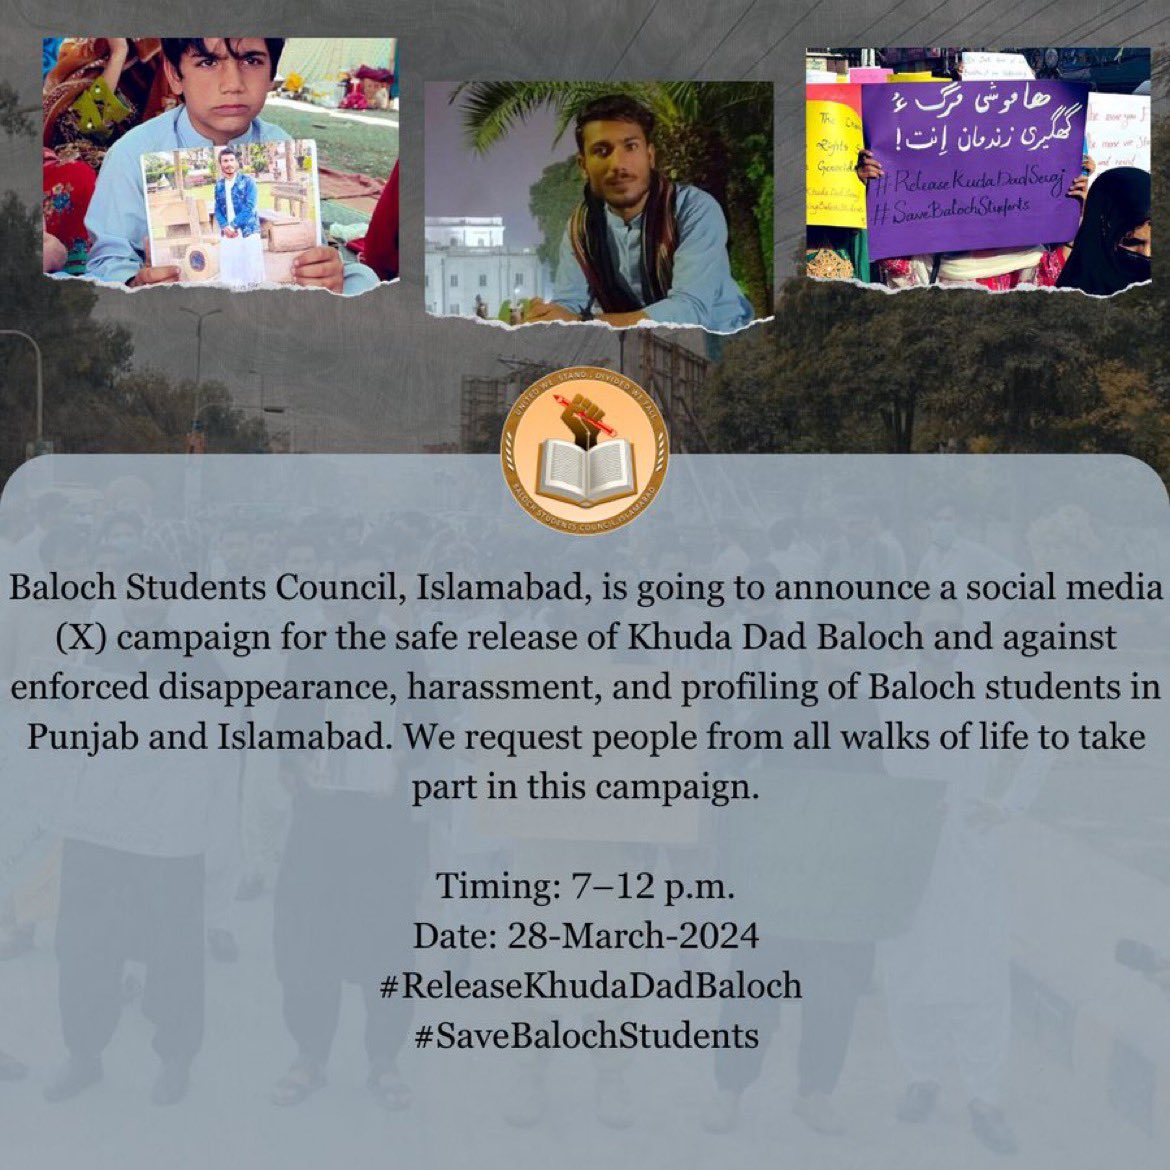 Baloch Students Council, Punjab Warmly Supports today’s X Campaign announced by Baloch BSC, Islamabad for Release of Khuda Dad Seraj and against Enforced Disappearances, harassment and profiling of Baloch Students. We Urge people from all walks of life to participate.